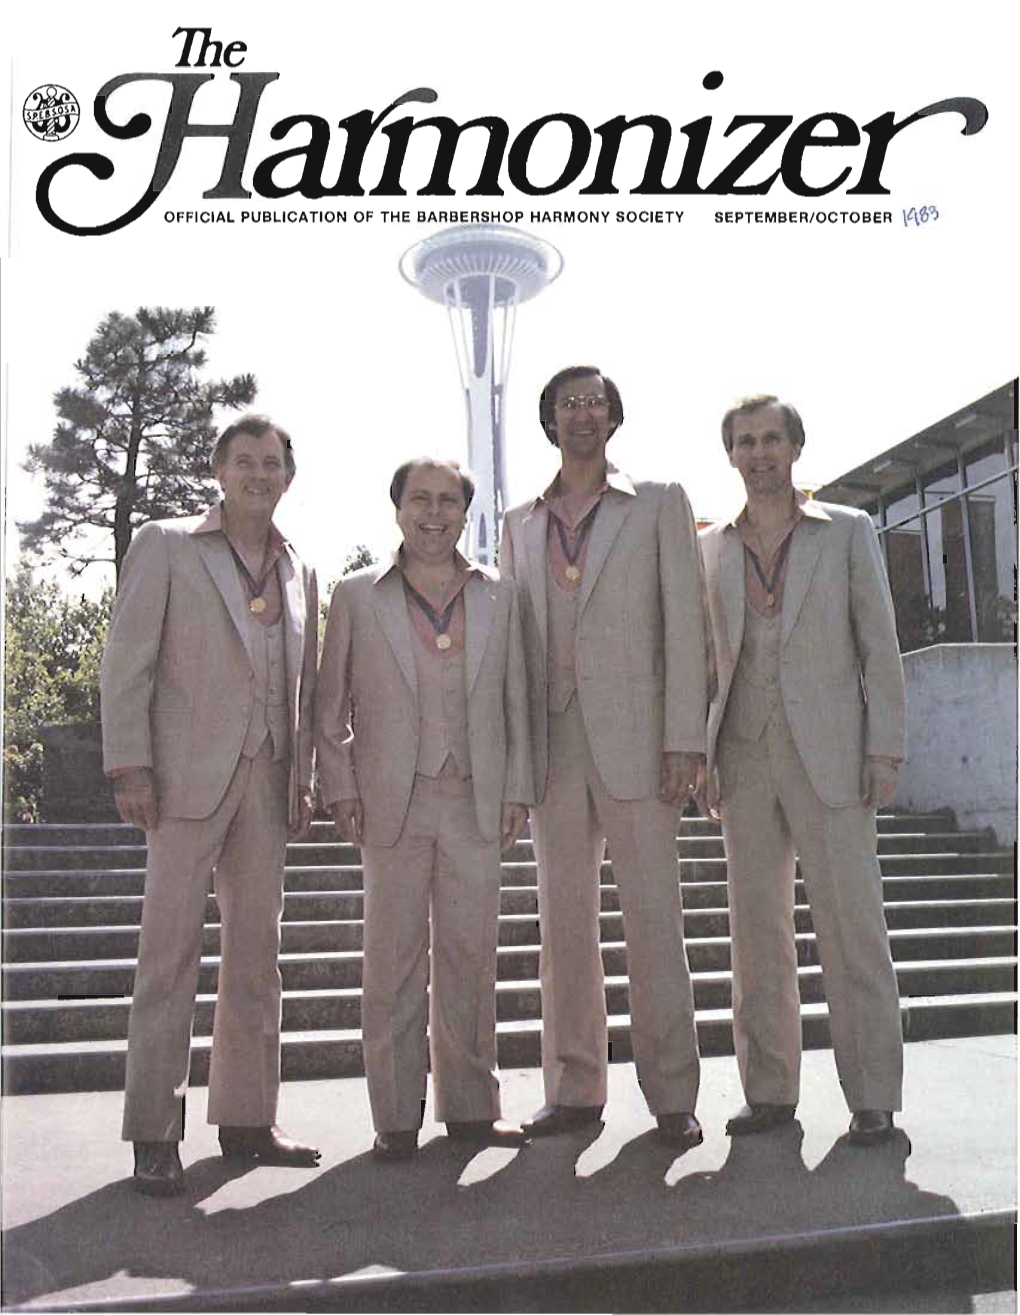 Official Publication of the Barbershop Harmony